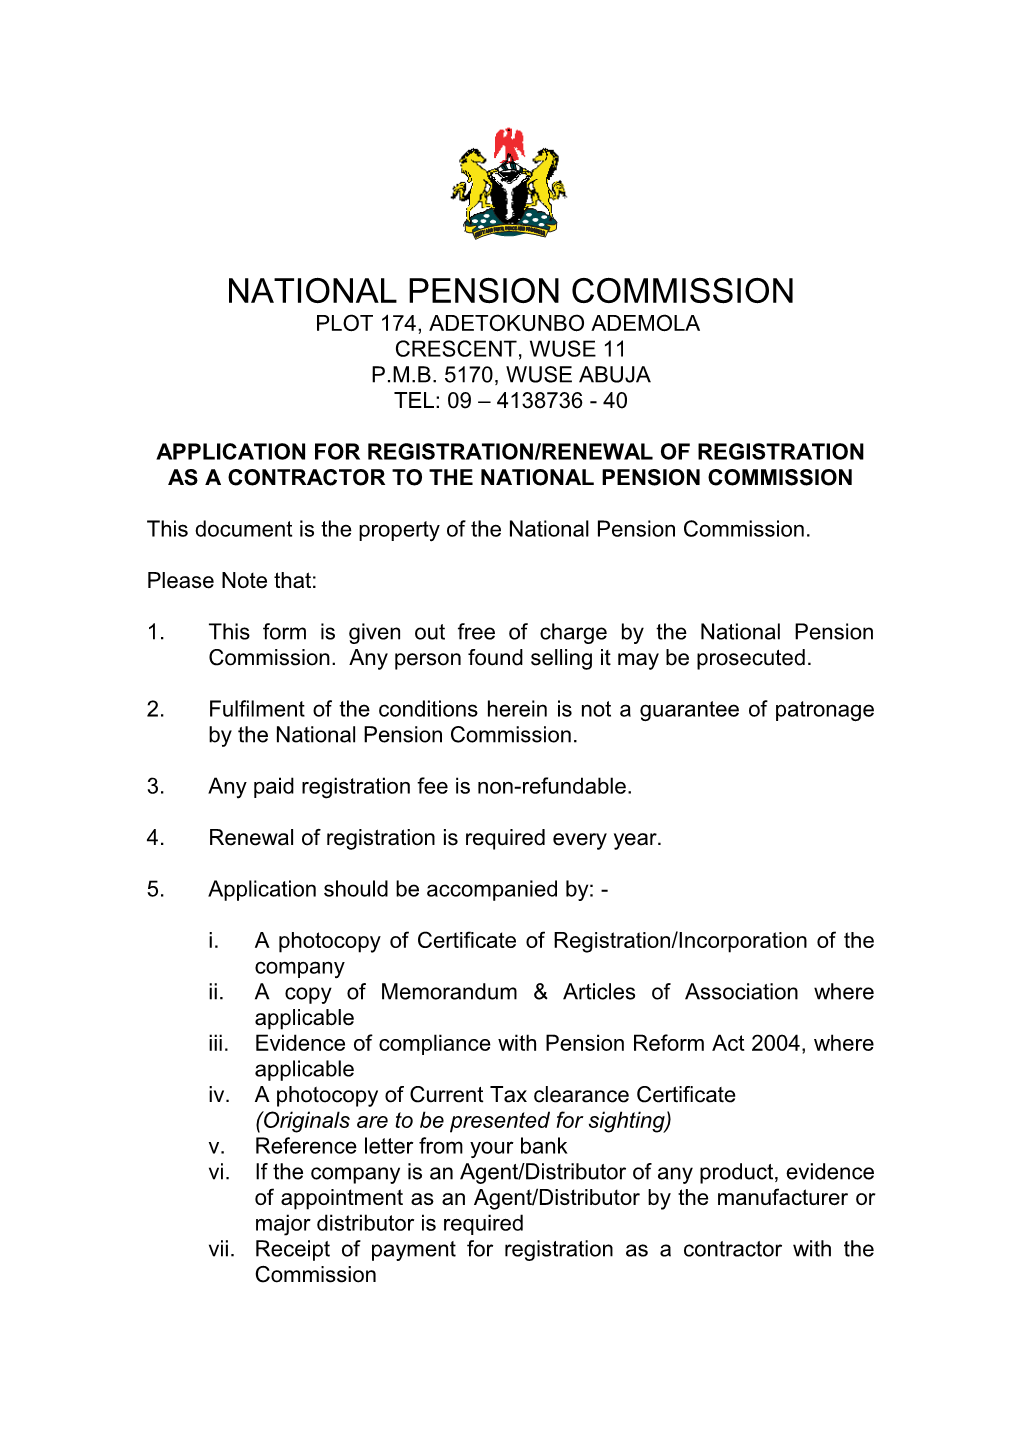 Application Form for Registration / Renewal of Registration As a Contractor to the National